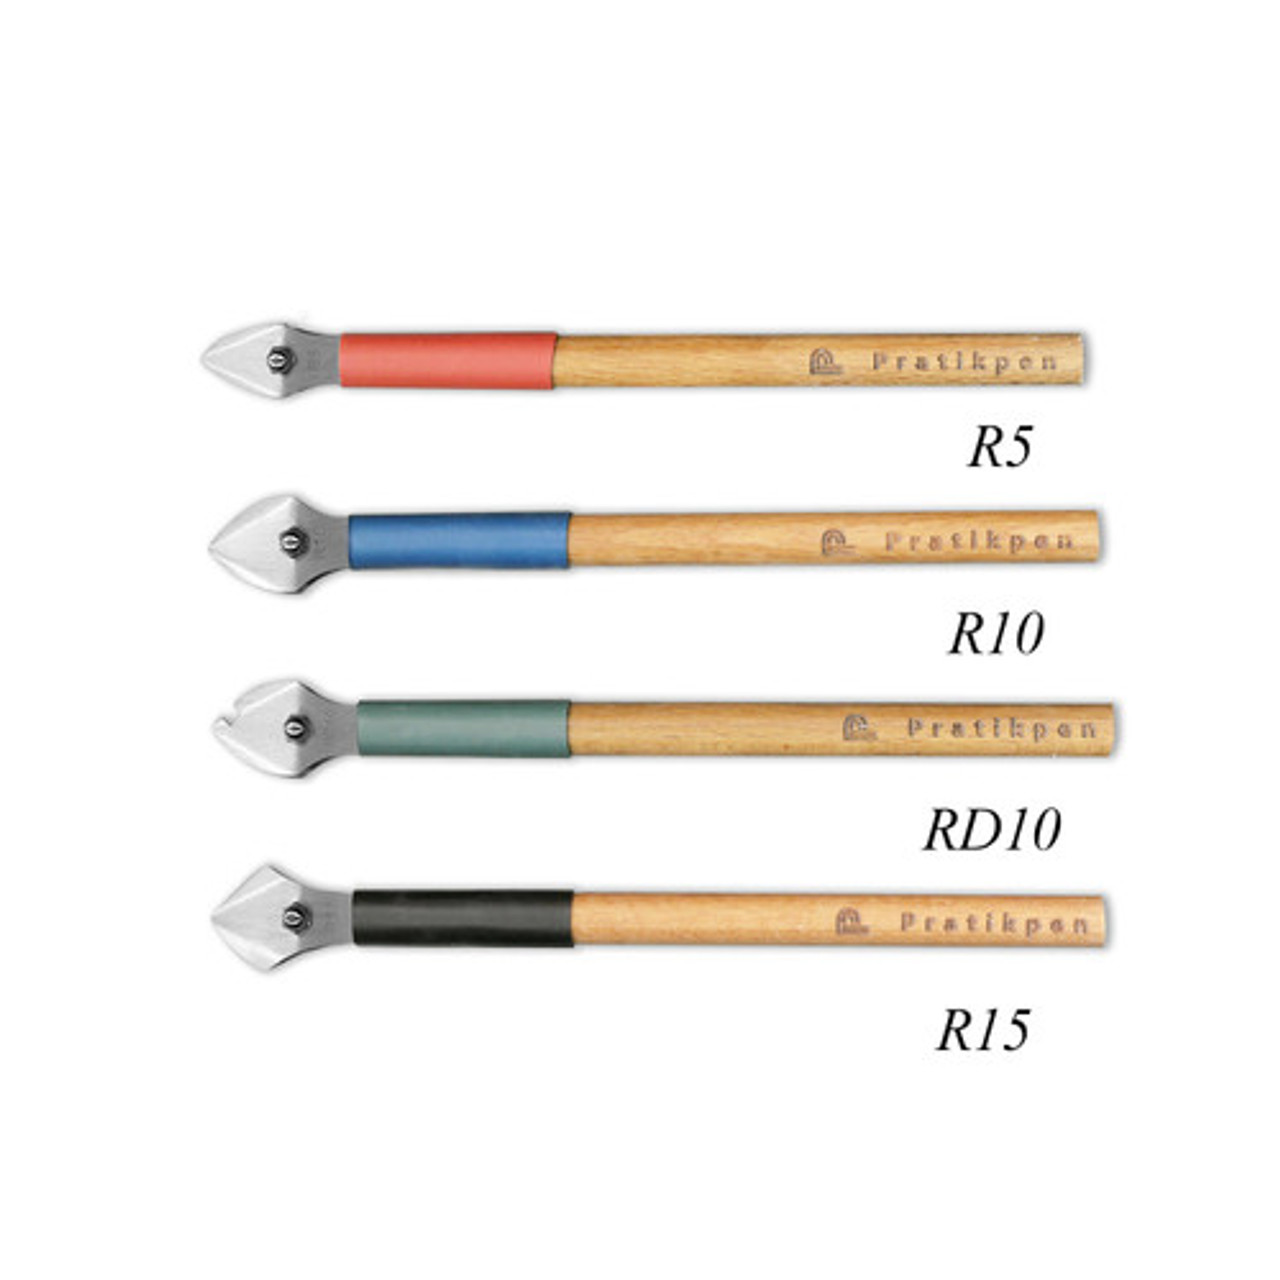 Professional Oval Ruling Pens, Group of 3 